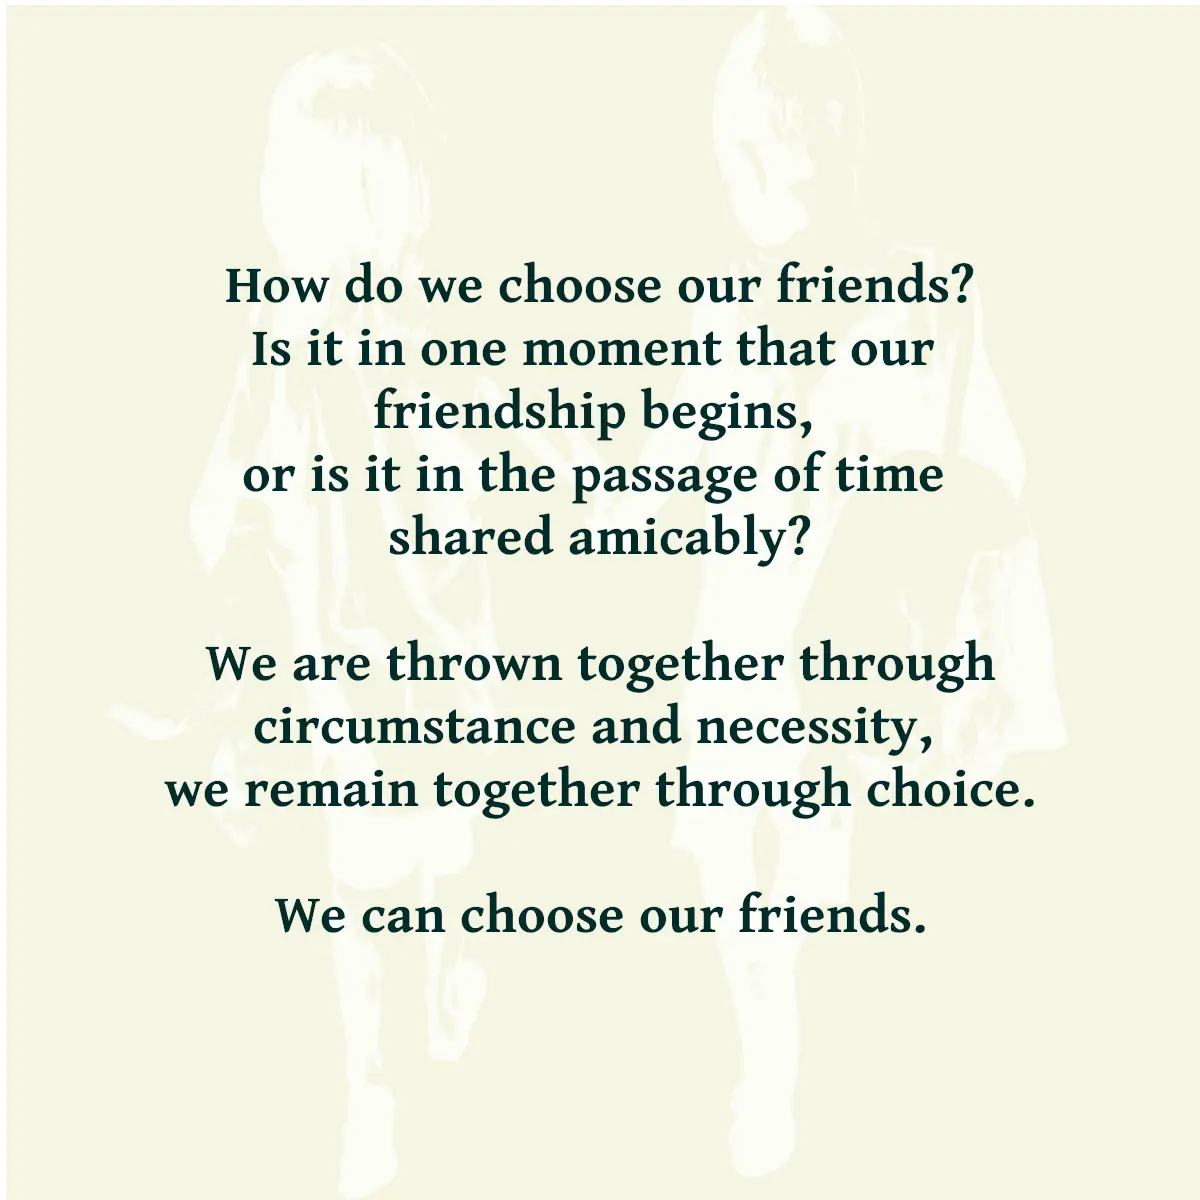 Text reading: How do we choose our friends? Is it in one moment that our friendship begins, or is it in the passage of time shared amicably? We are thrown together through circumstance and necessity, we remain together through choice. We can choose our friends.